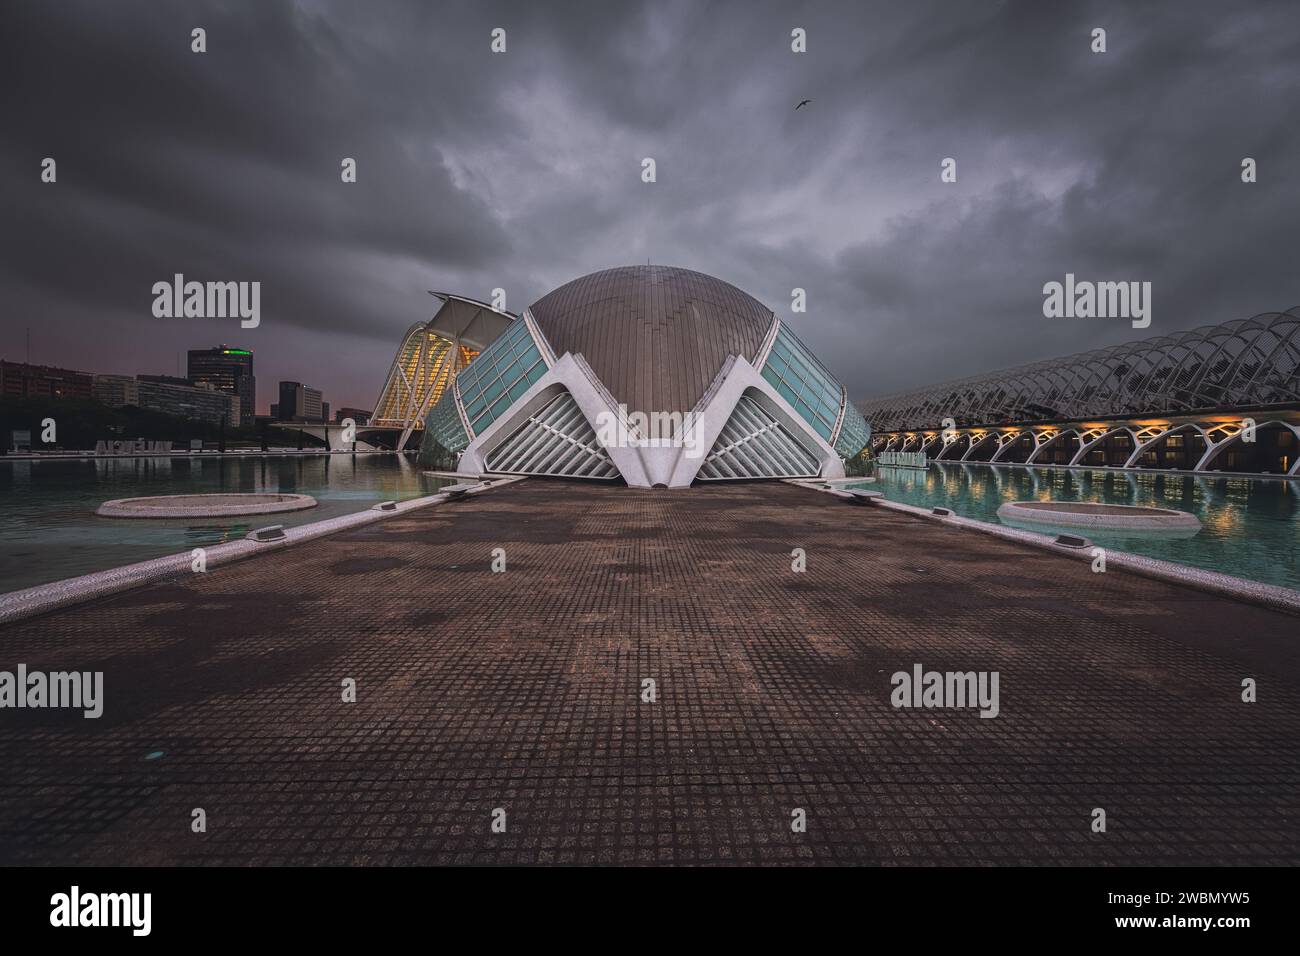 The Hemisferic of the City of Arts and Sciences at dawn on a stormy day, in the city of Valencia, Spain. Stock Photo